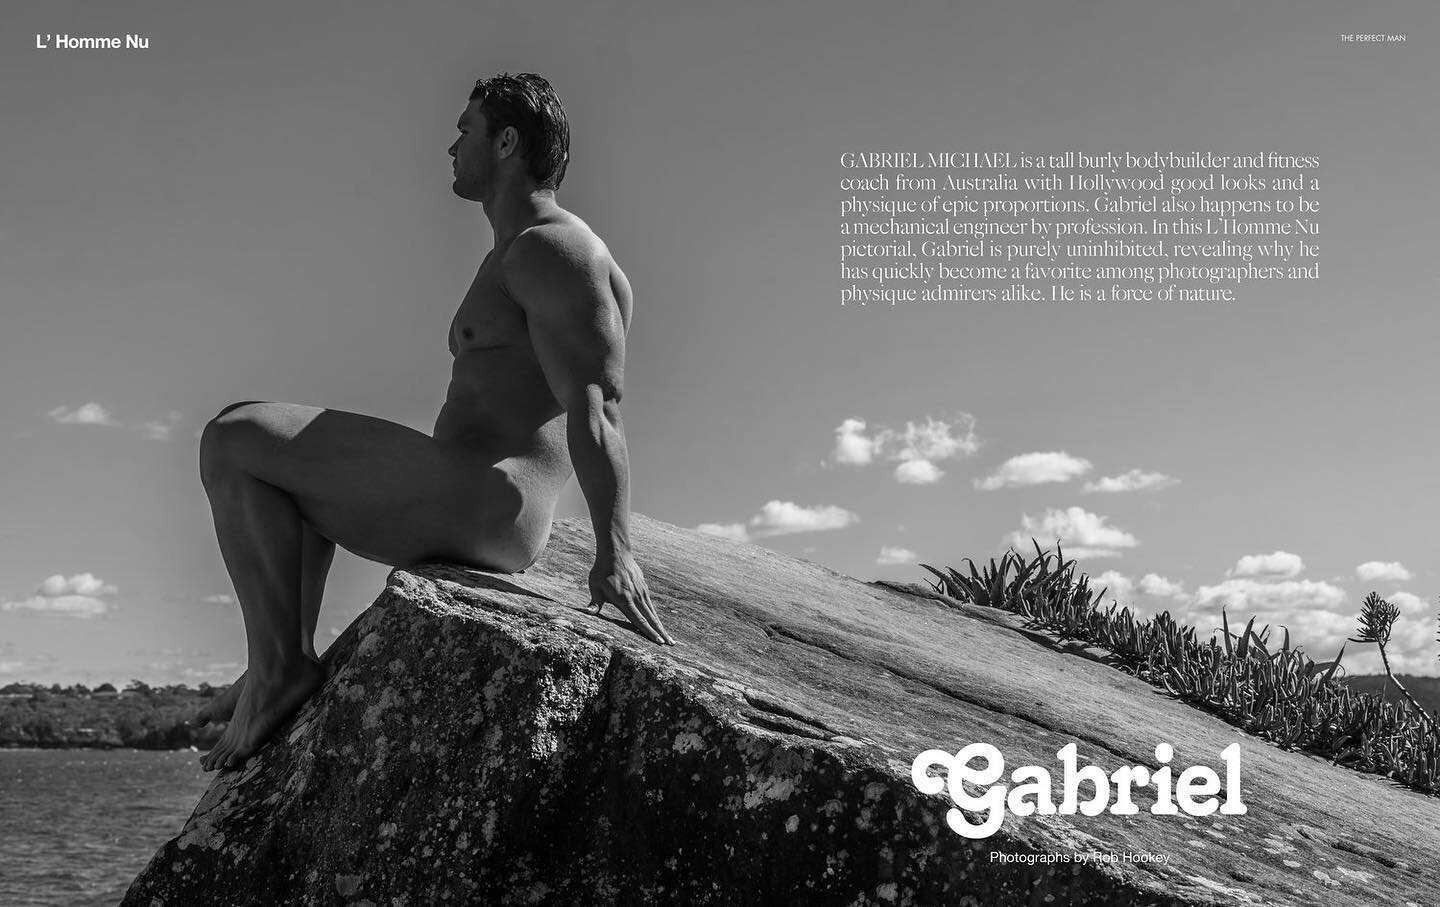 GABRIEL MICHAEL, is a tall burly bodvbuilder and fitness coach from Australia with Hollywood good looks and a physique of epic proportions. Gabriel also happens to be a mechanical engineer by profession. In this L&rsquo;Homme Nu pictorial, Gabriel is